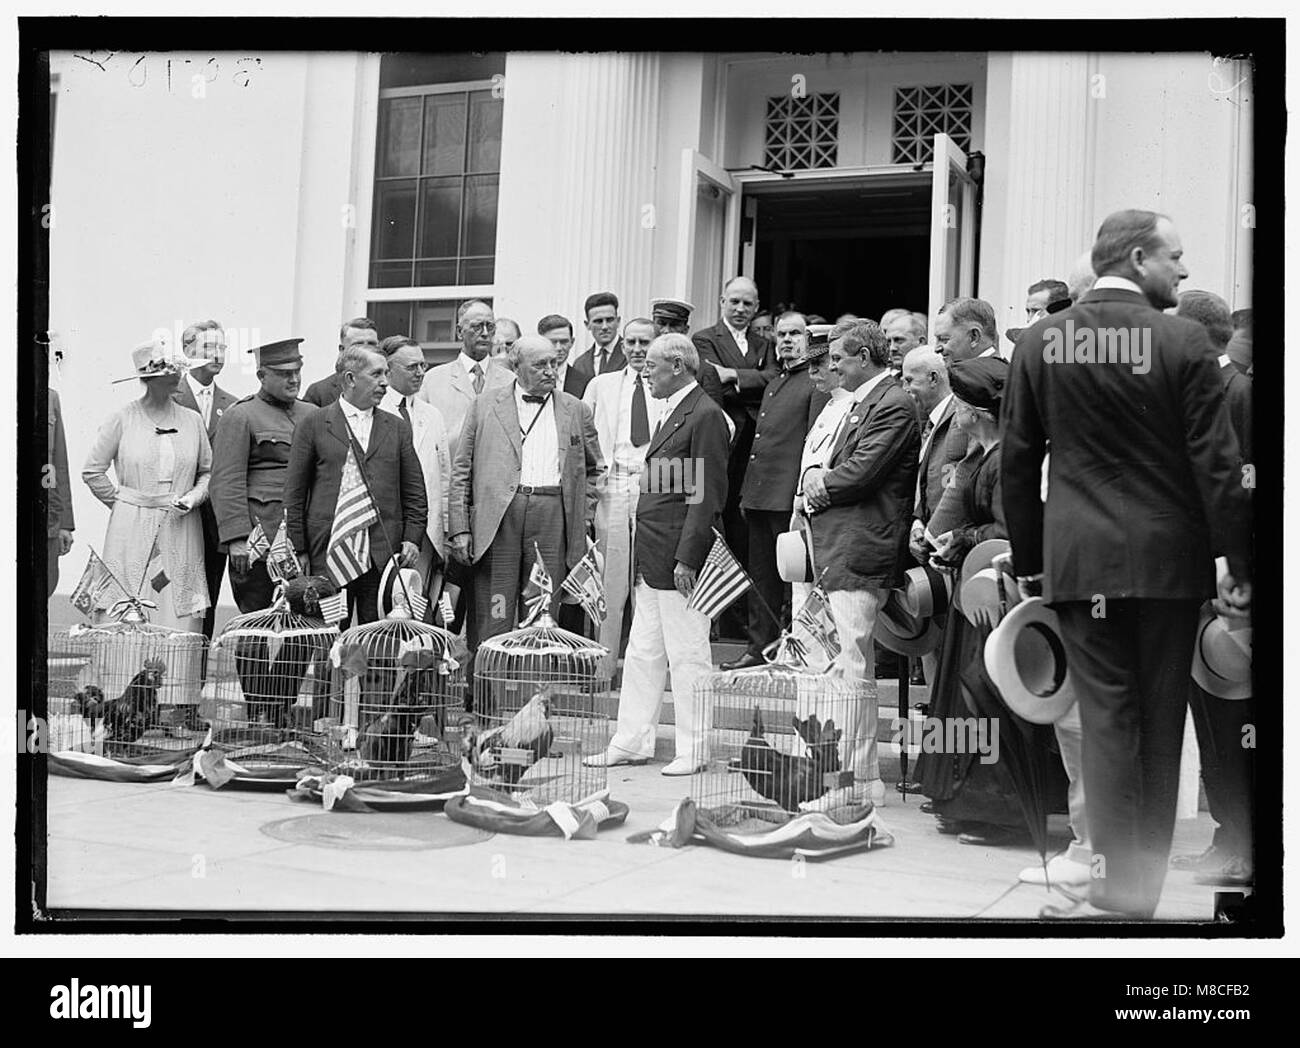 ALABAMANS. ROOSTERS BEING PRESENTED TO ALABAMA CITIZENS AT WHITE HOUSE. REP. EDWARD BERTON ALMON, 4TH FROM LEFT; J.H. BANKHEAD, LEFT OF WILSON, FRONT; WILLIAM BROCKMAN BANKHEAD, RIGHT REAR; LCCN2016870287 Stock Photo